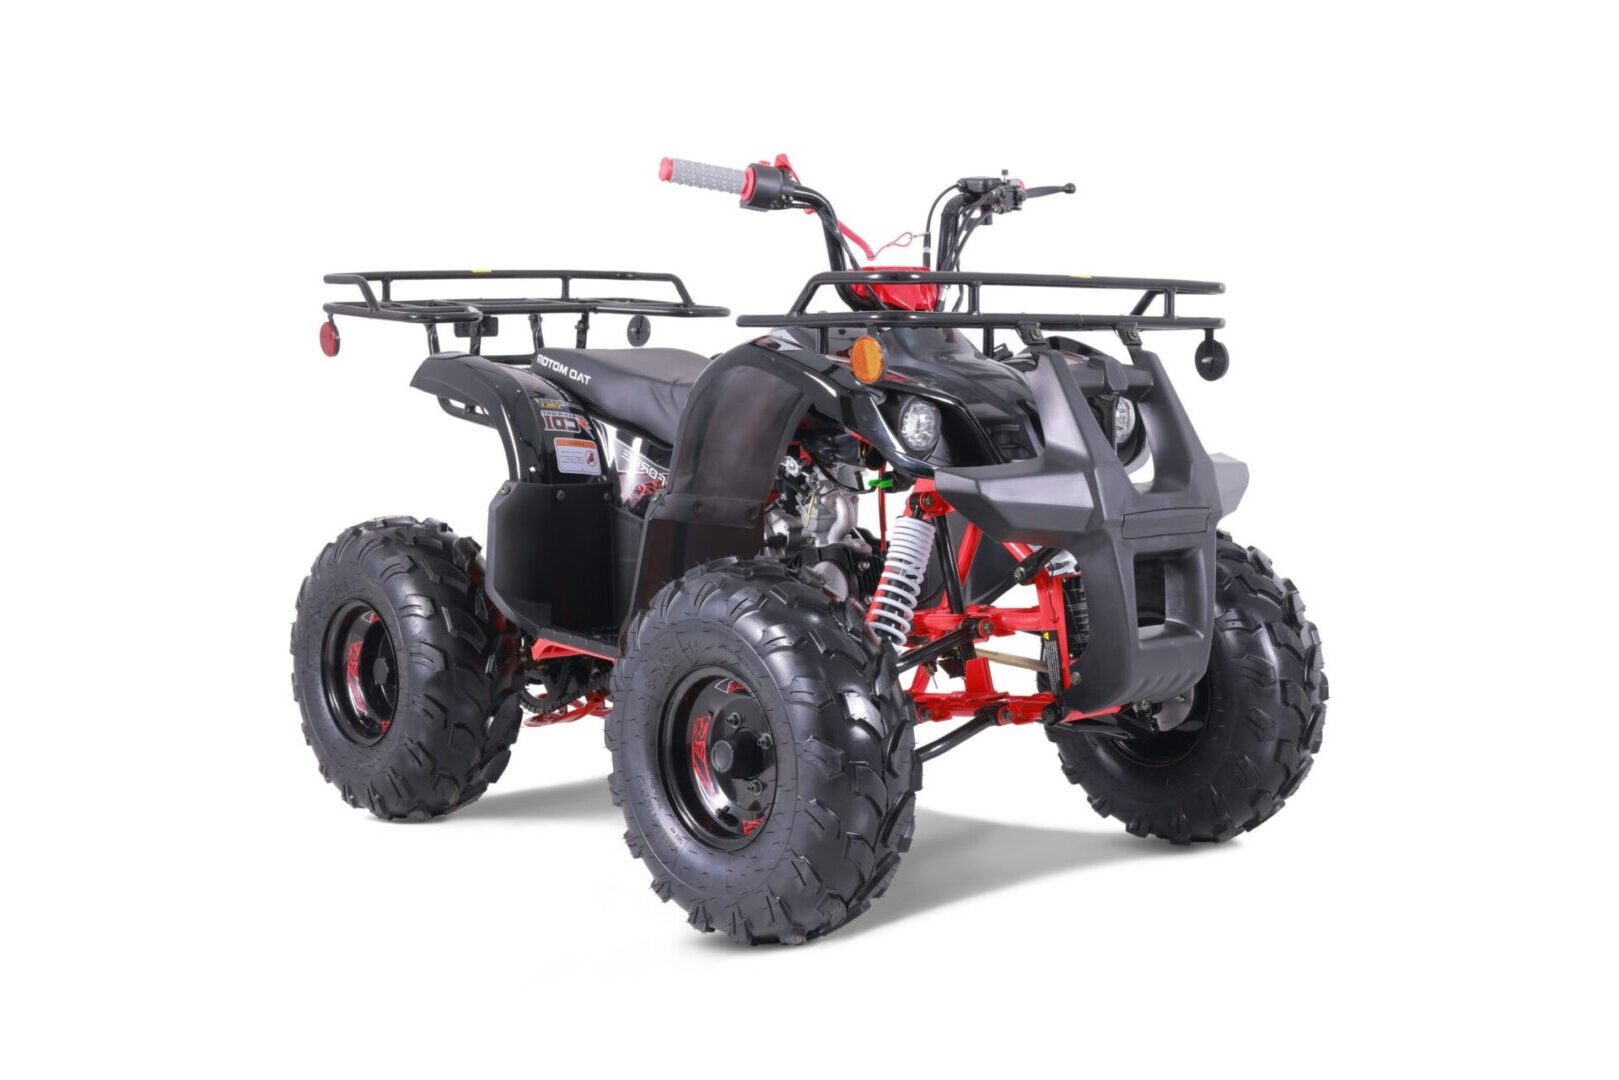 A red and black atv with two large tires.